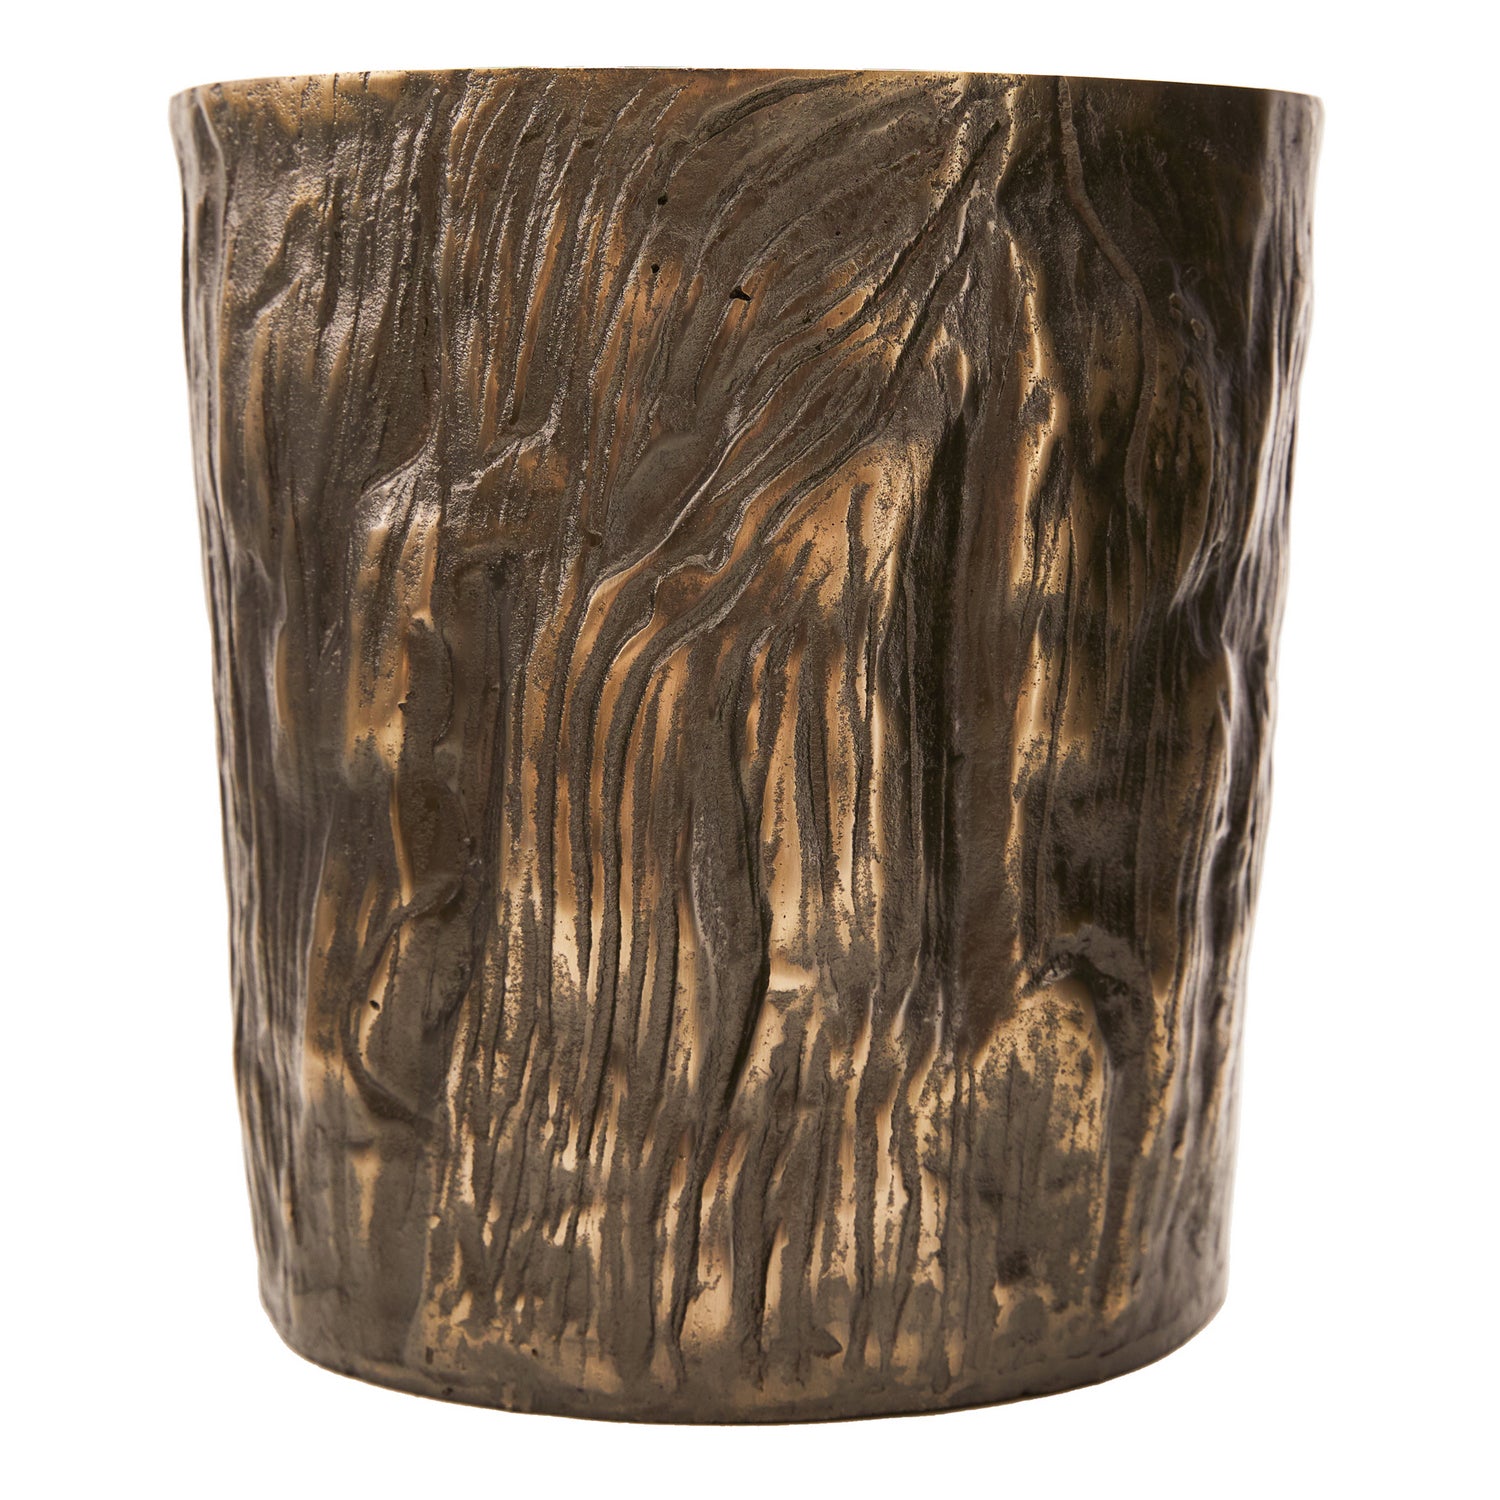 Ice Bucket from the Stedman collection in Antique finish